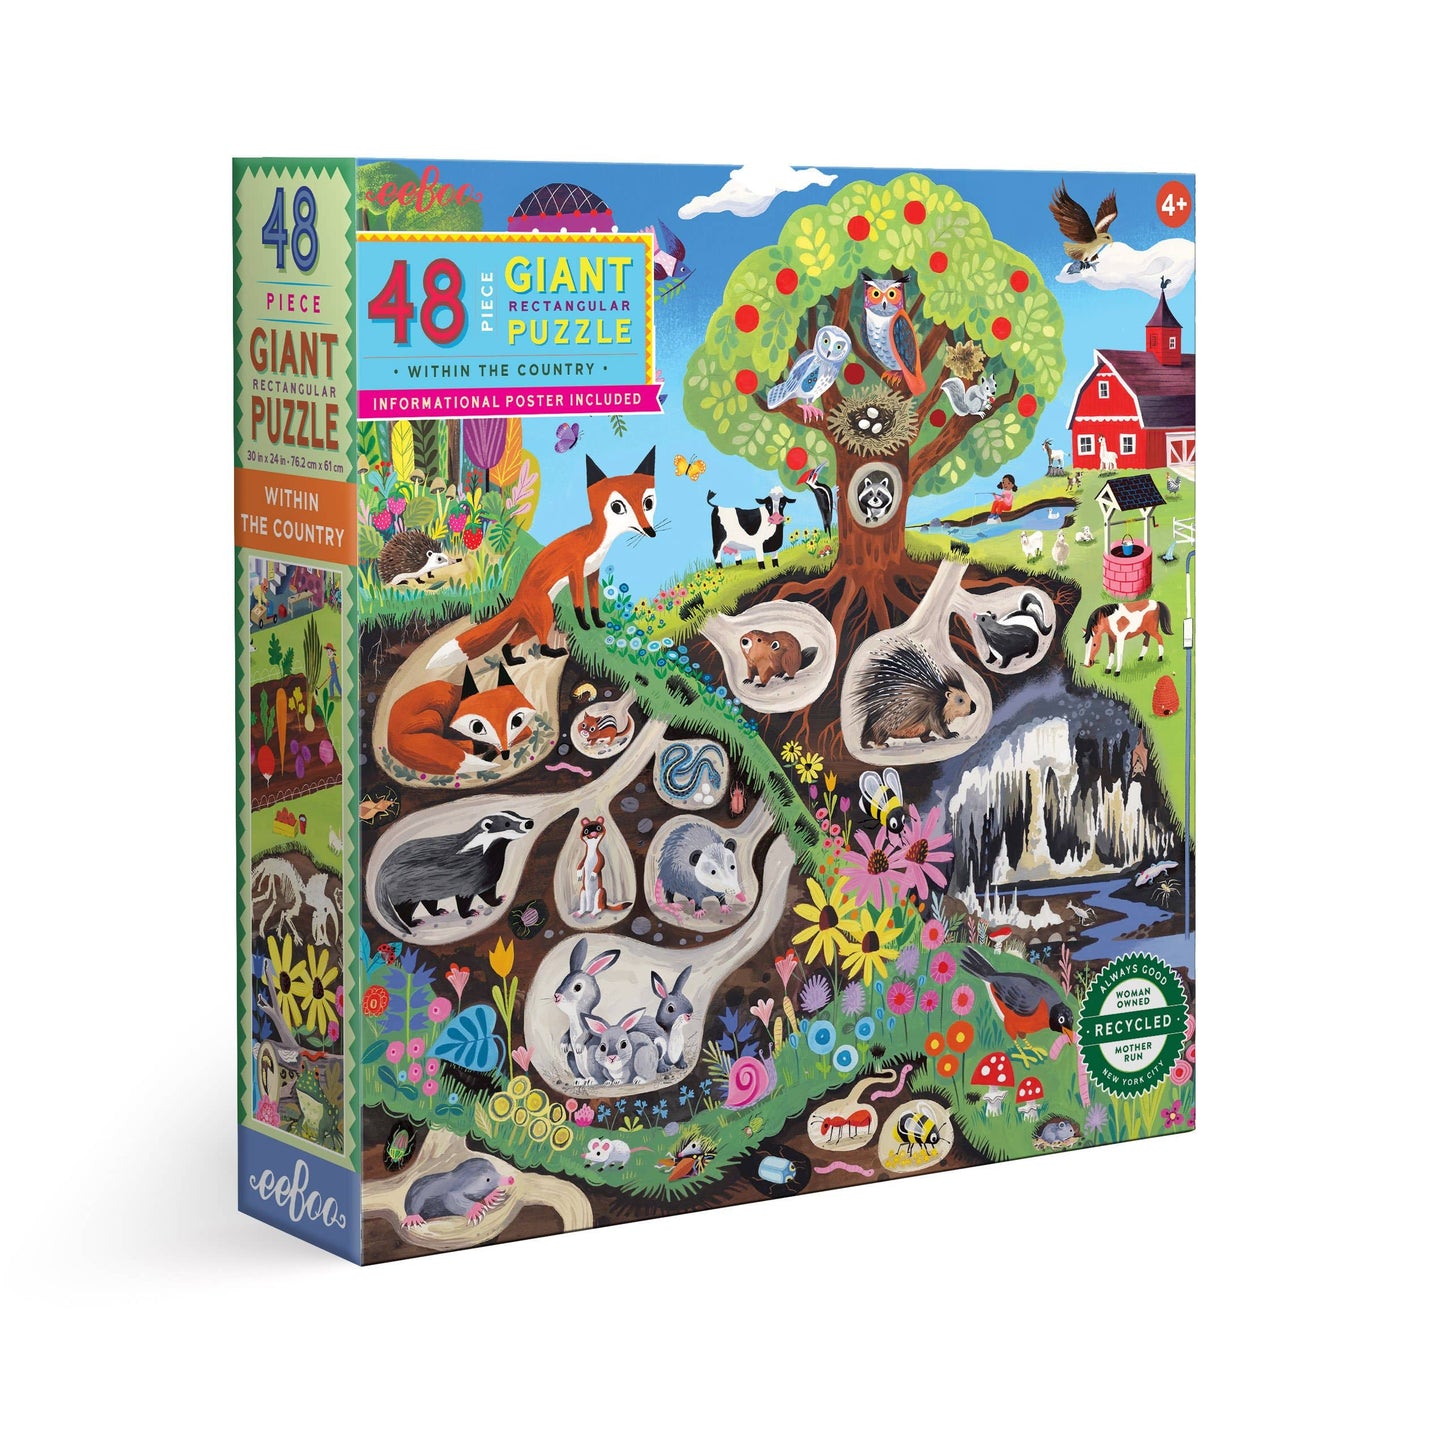 Eeboo - Within the Country 48 Piece Giant Puzzle